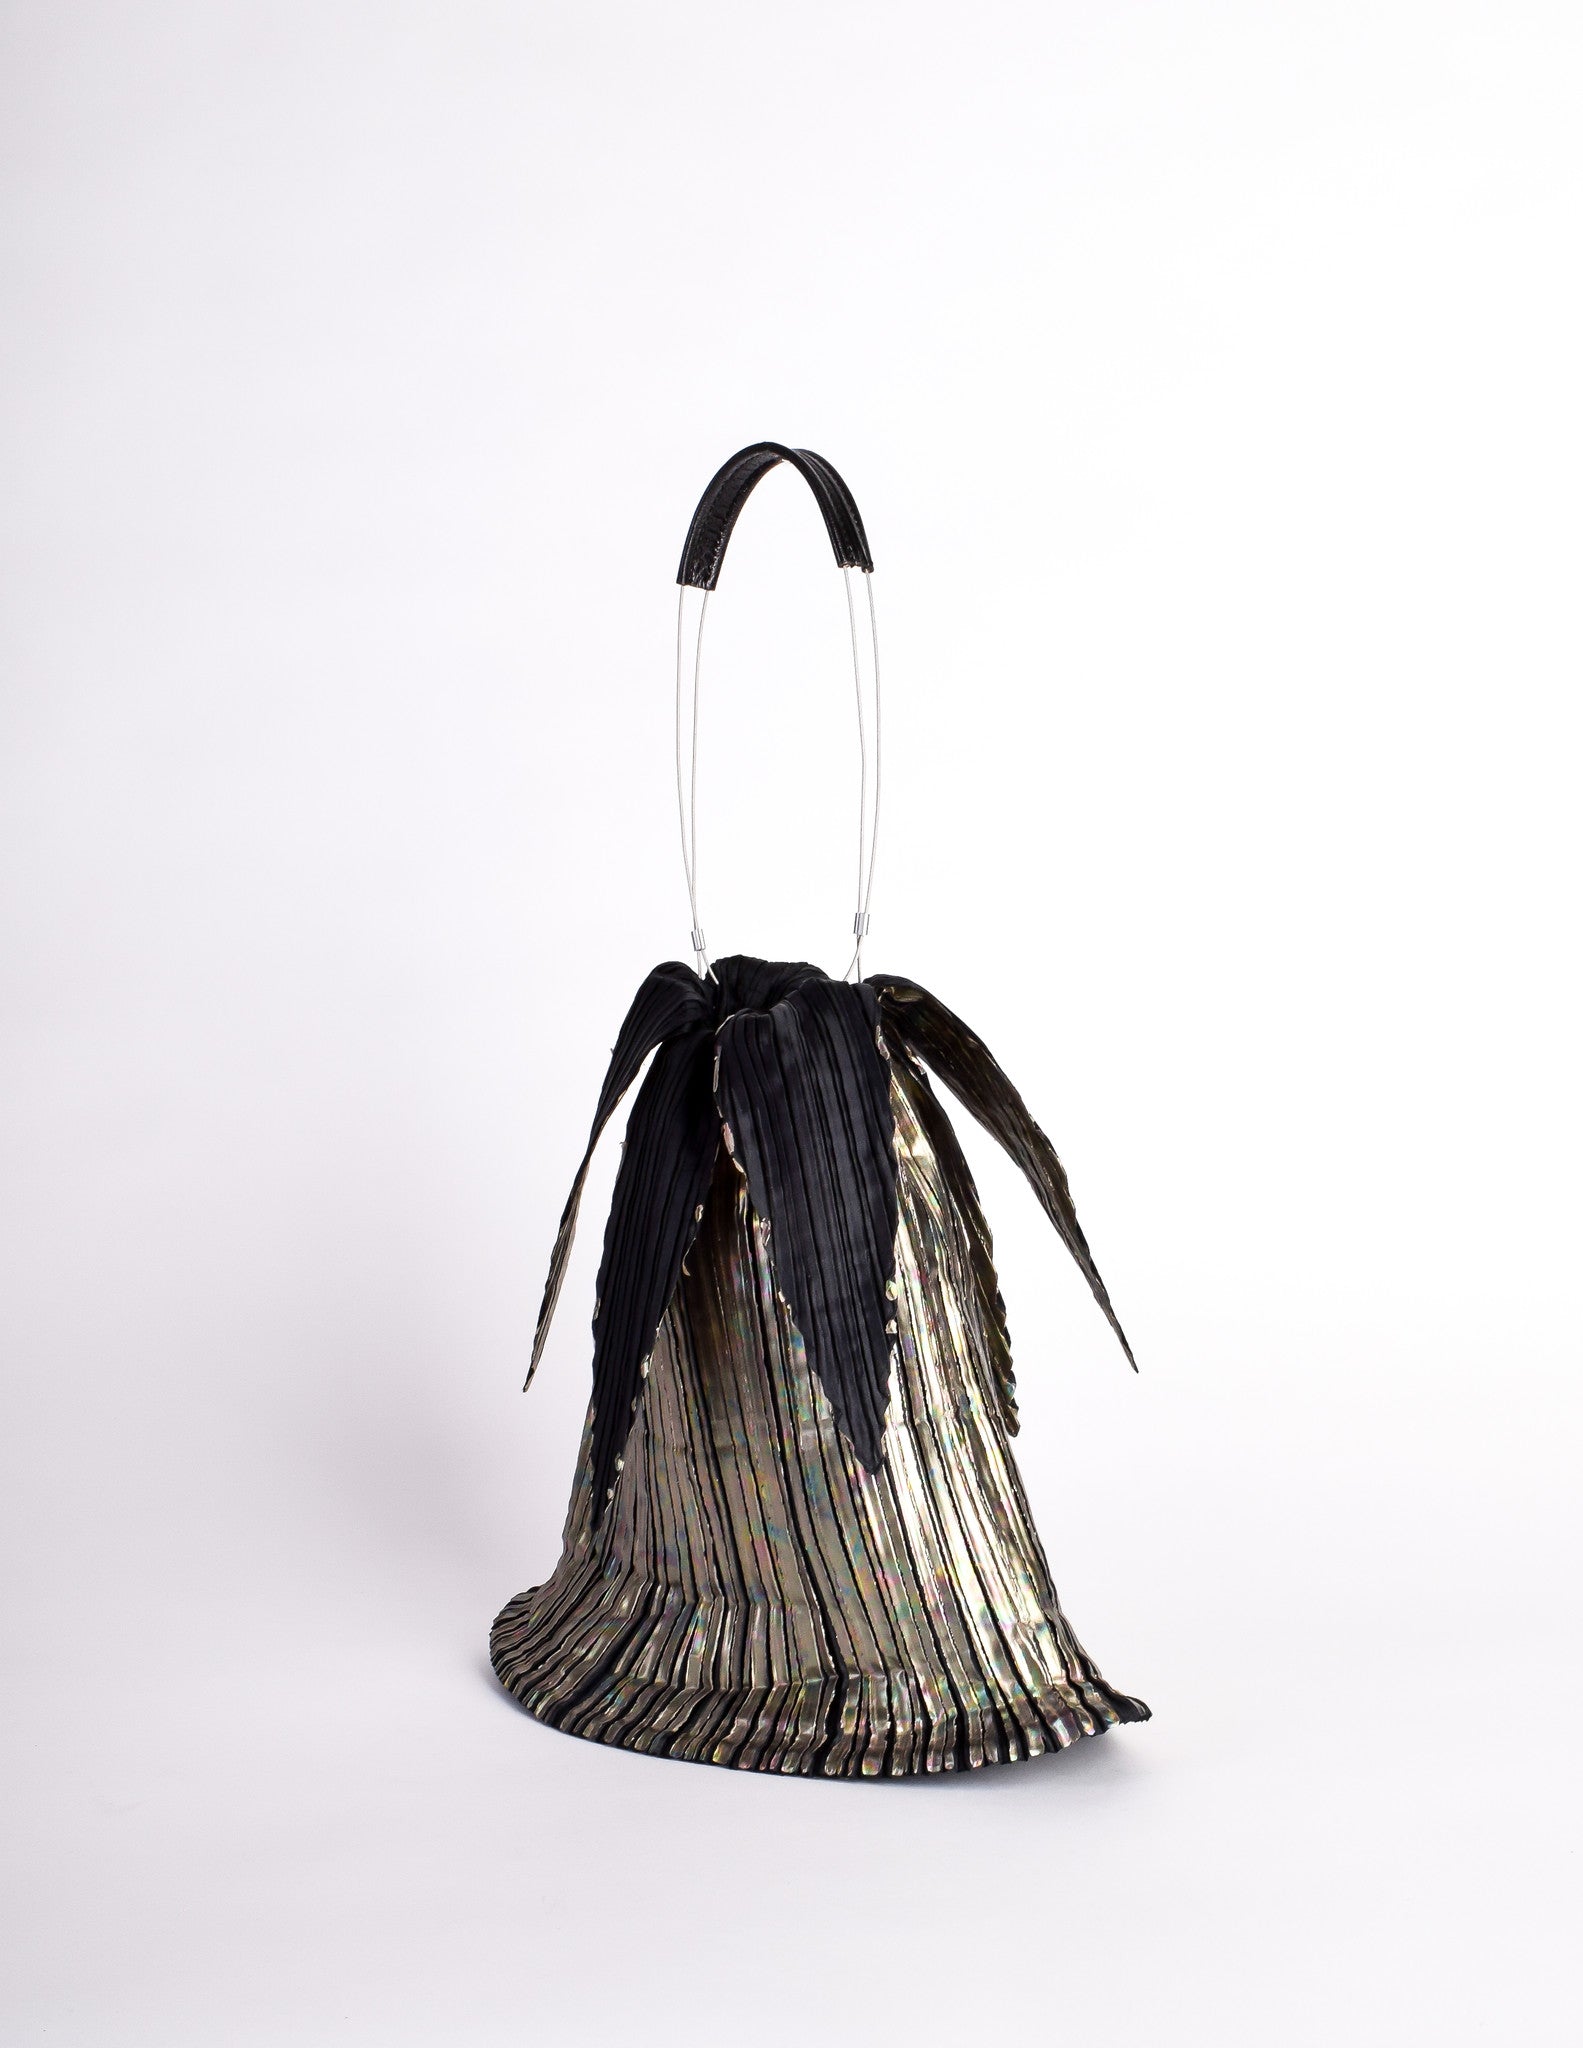 Issey Miyake Vintage Black & Gold Iridescent Pleated Bag - from ...